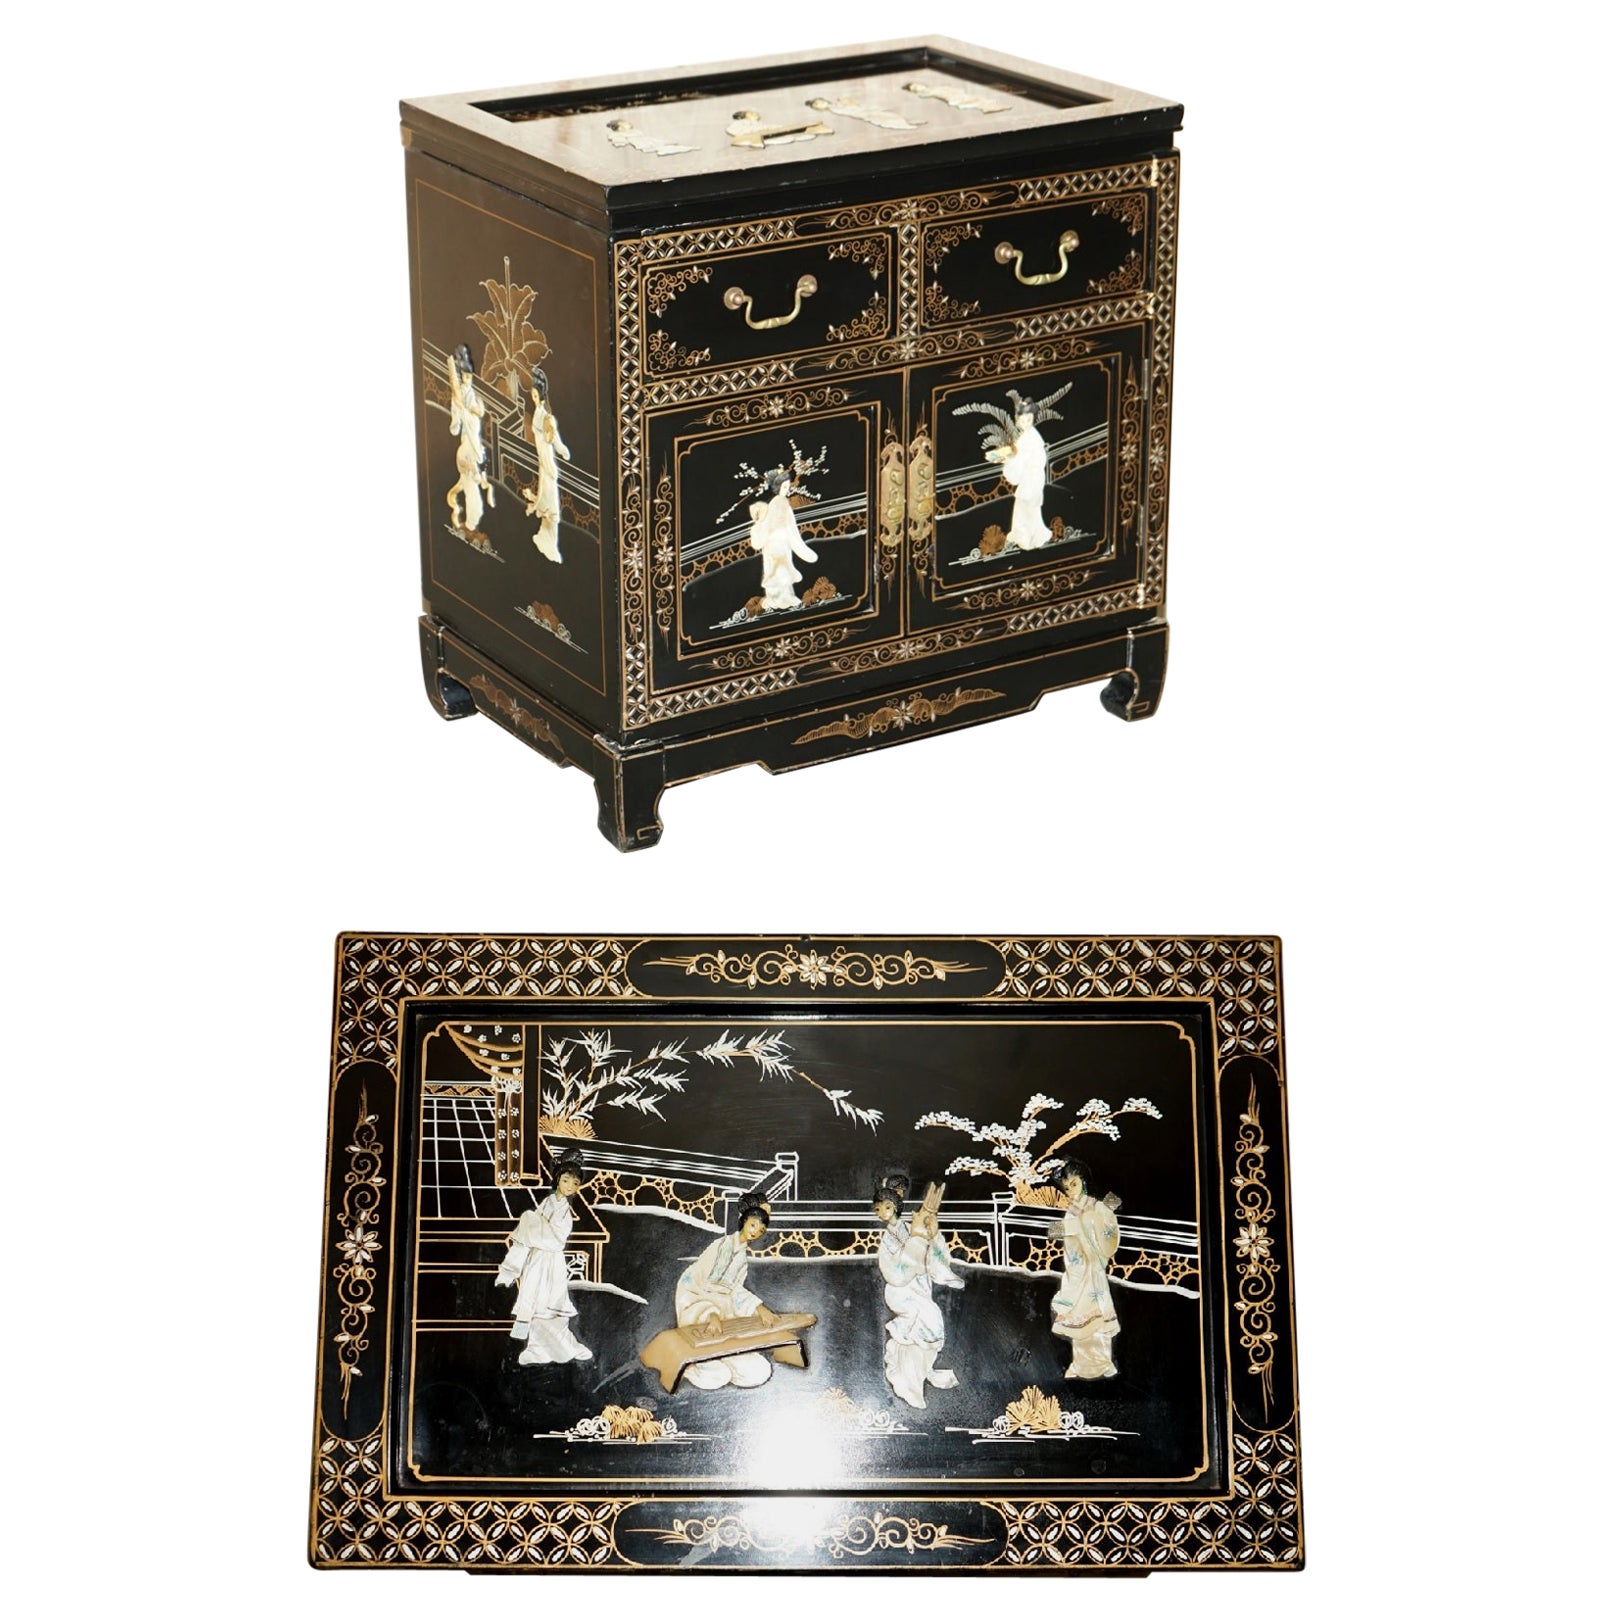 Stunning CHINOISERIE GEISHA GIRLS LACQUER SiDE CABINET SOAPSTONE